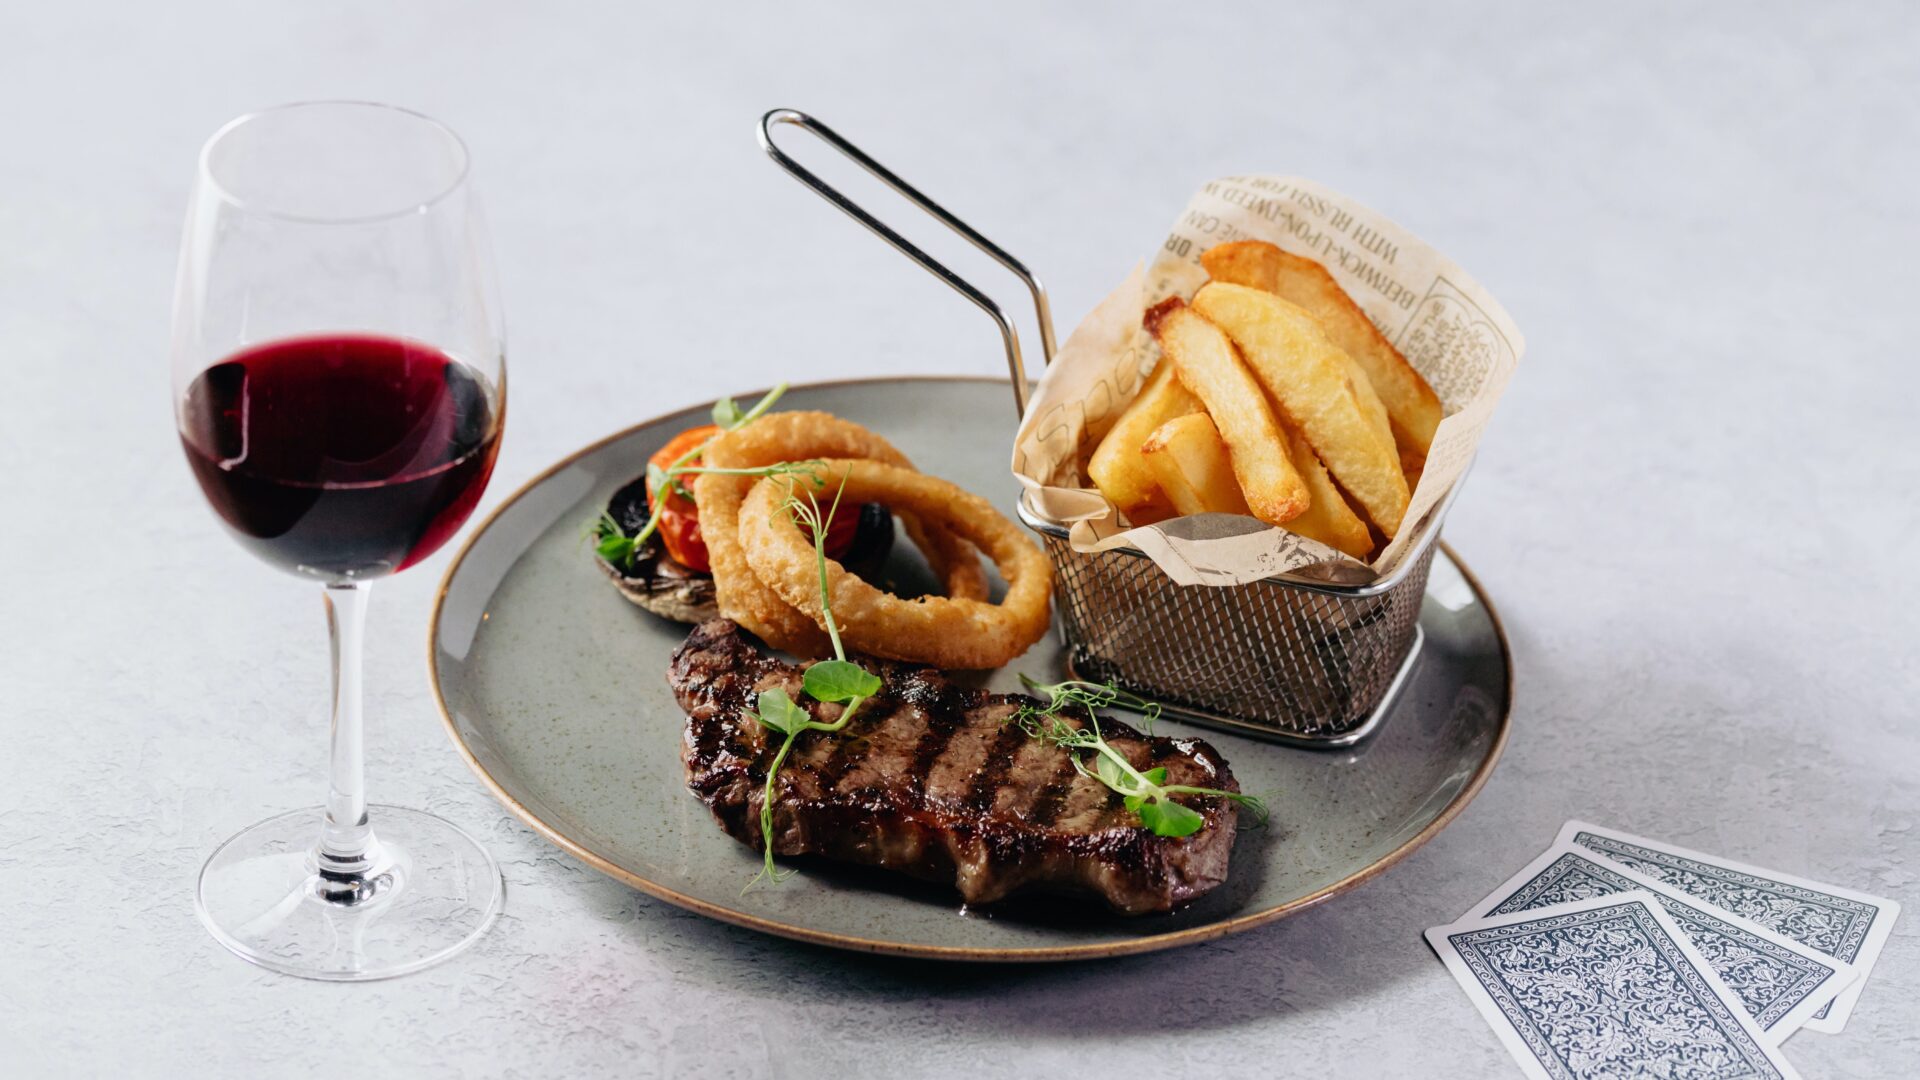 Napoleons Casino Dining Offers - For the Food Lovers